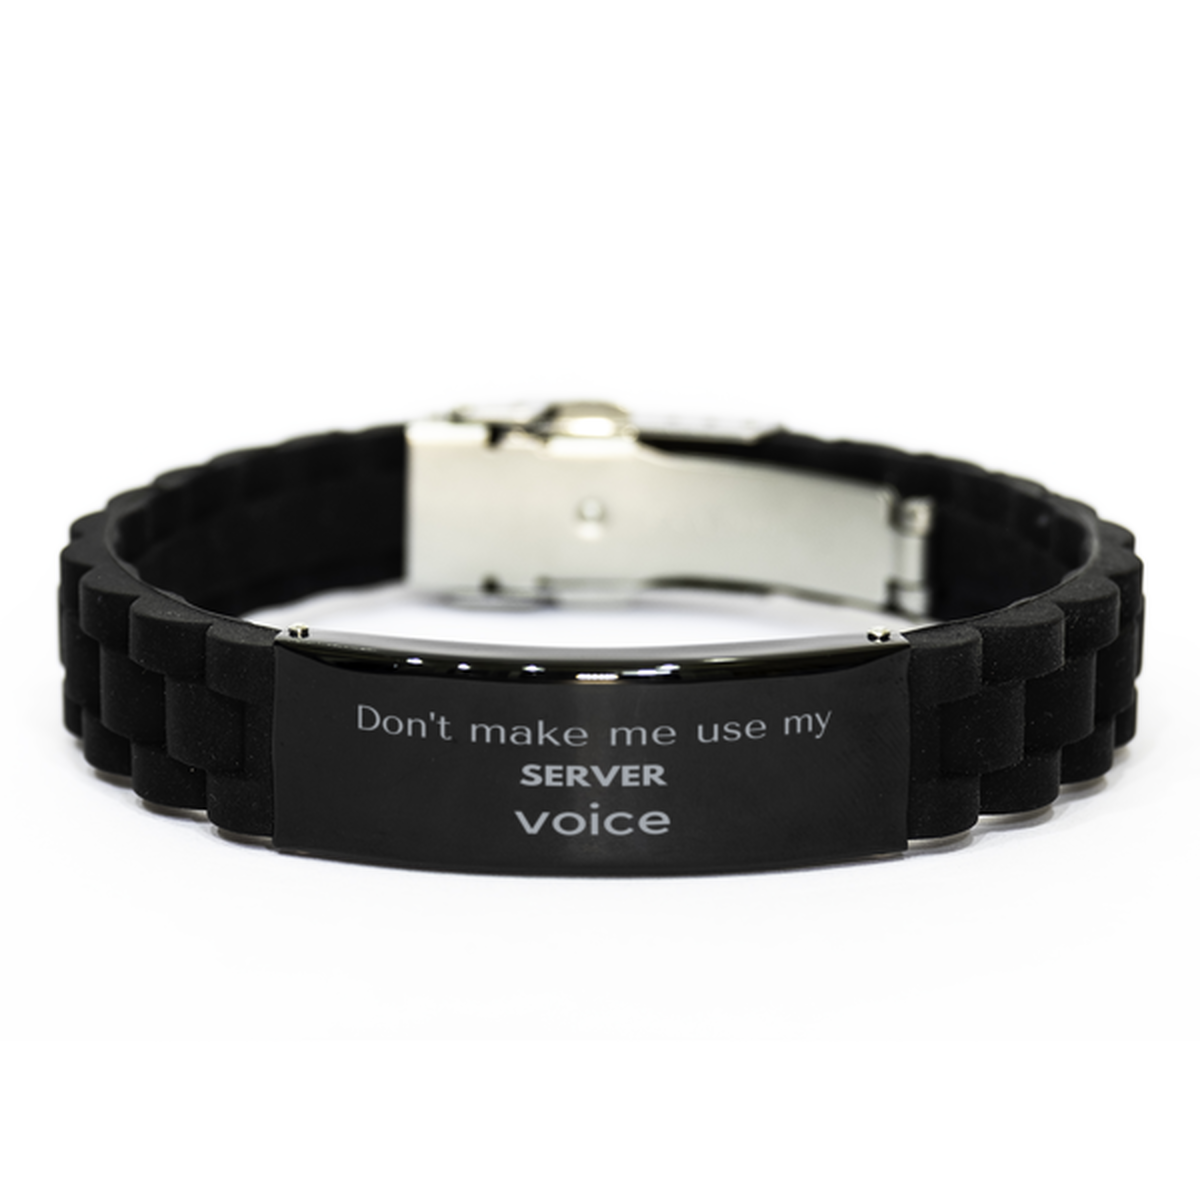 Don't make me use my Server voice, Sarcasm Server Gifts, Christmas Server Black Glidelock Clasp Bracelet Birthday Unique Gifts For Server Coworkers, Men, Women, Colleague, Friends